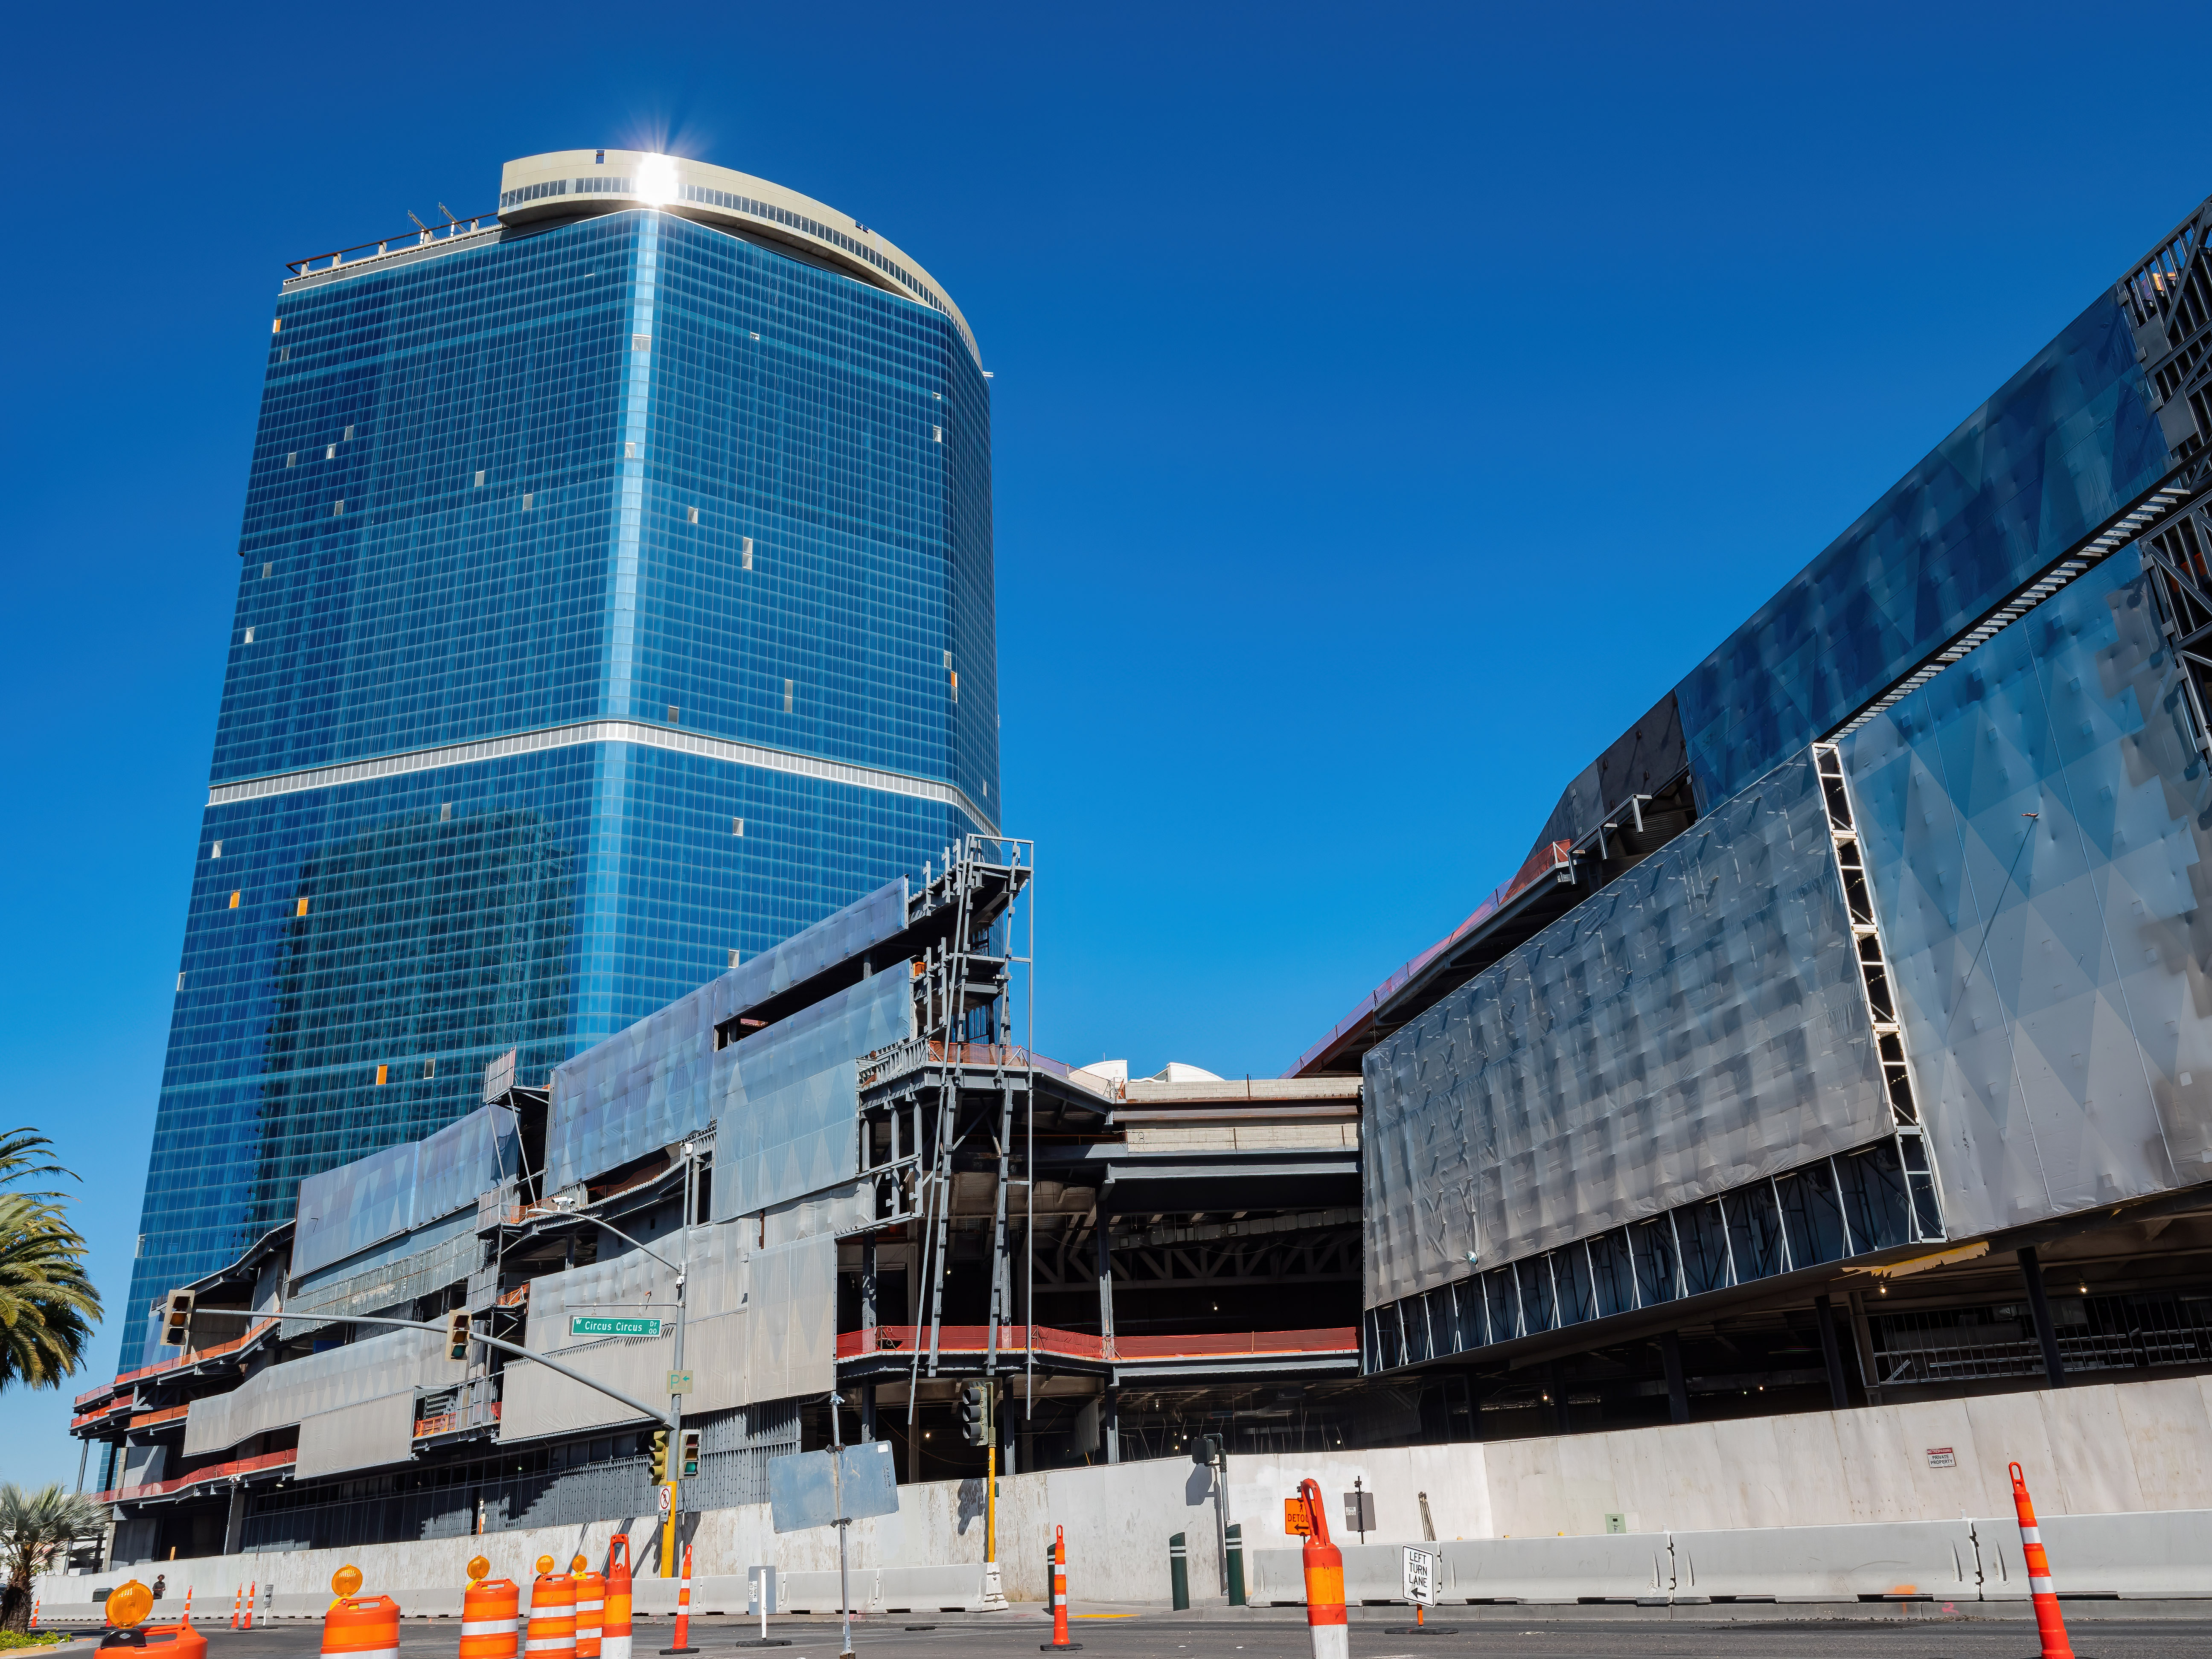 A half-finished casino on the Las Vegas Strip